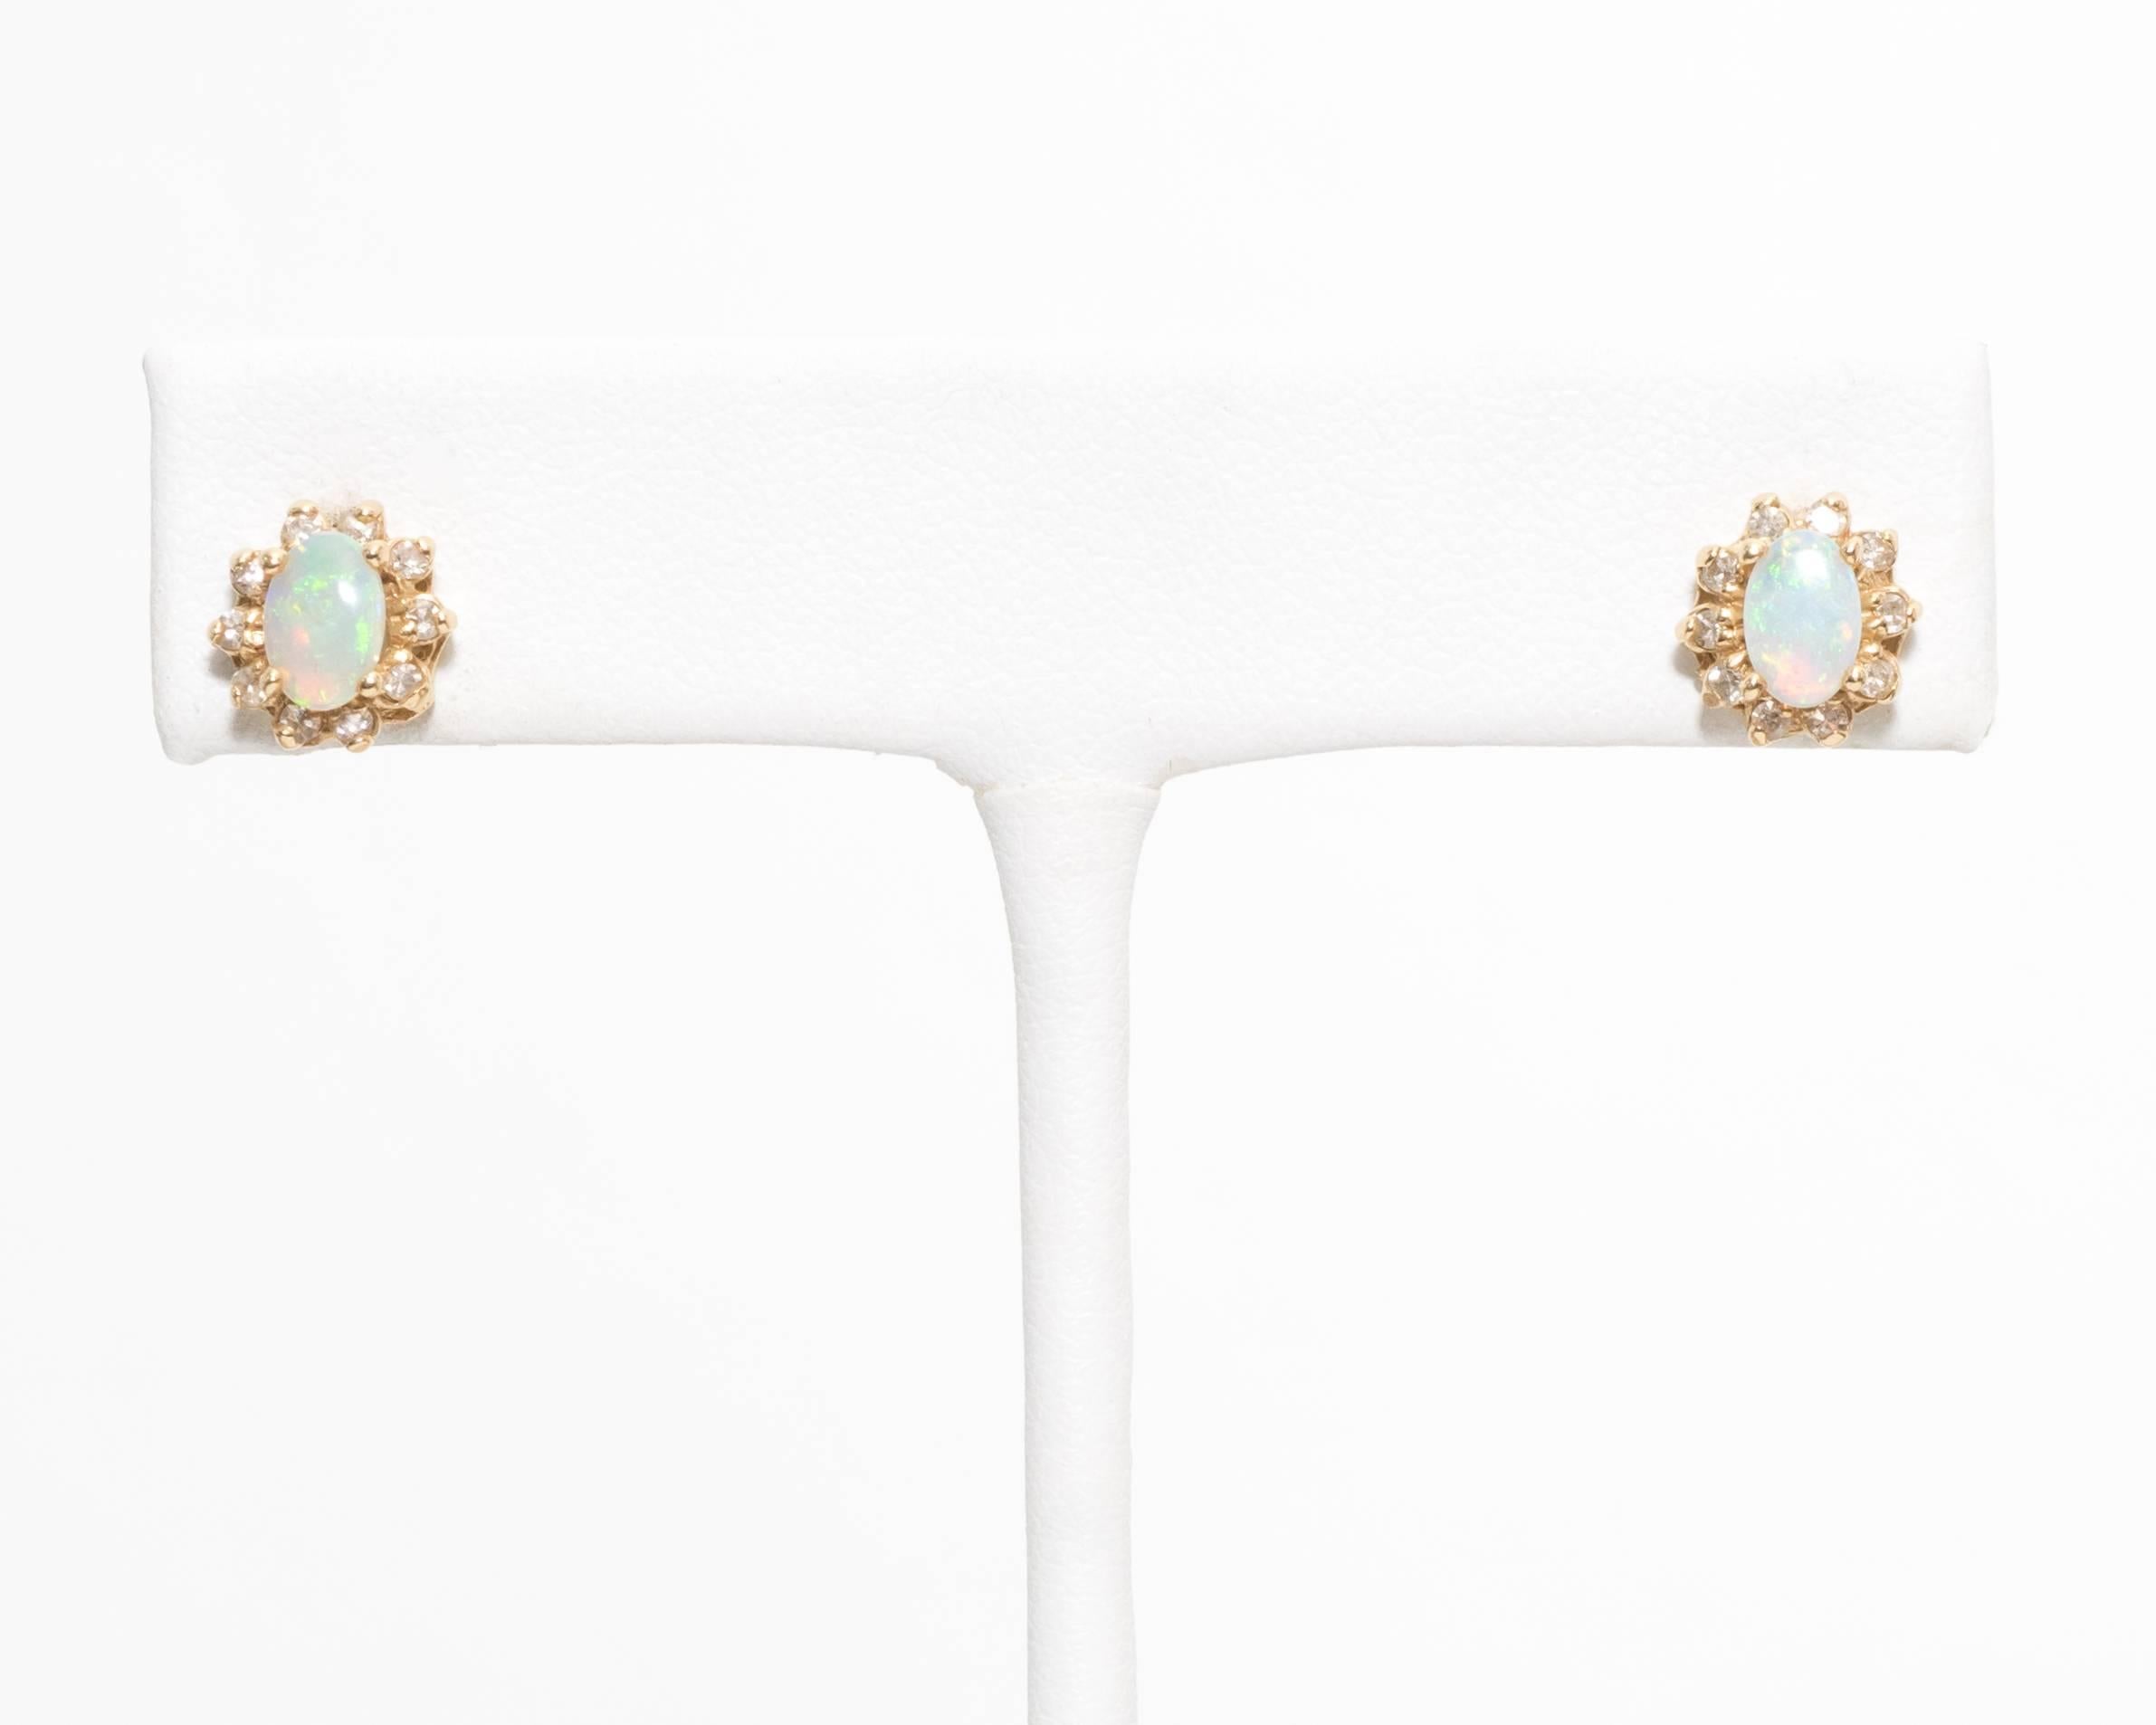 One can never go wrong with a pair of opal and diamond studs! This lovely pair totals 2 grams and has 0.10 carats of diamonds dancing with light around the gorgeous opal tone. 

Crafted in 14 Karat Yellow Gold
Feature a Pushback mechanism for extra